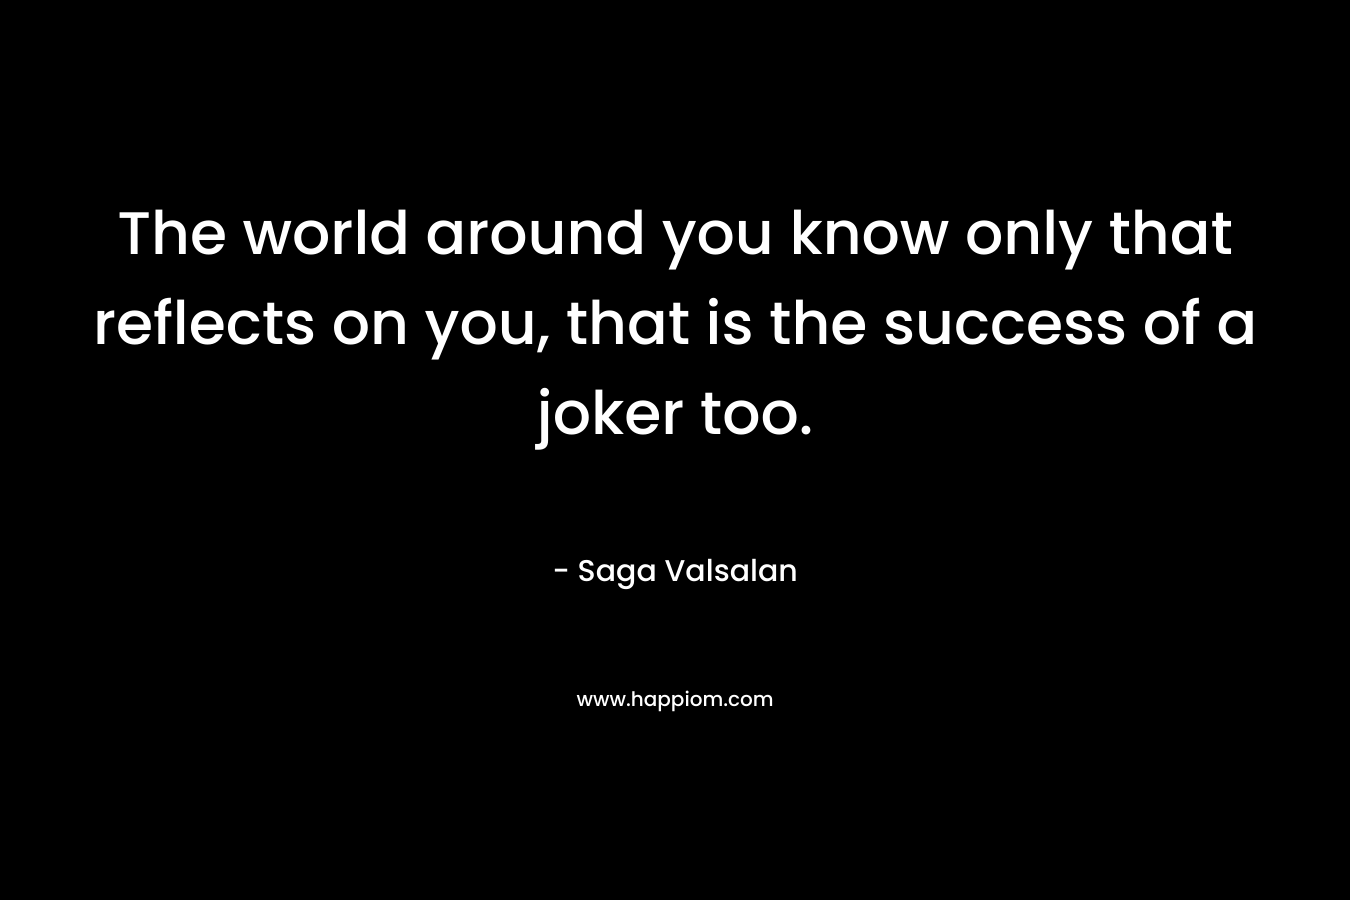 The world around you know only that reflects on you, that is the success of a joker too.